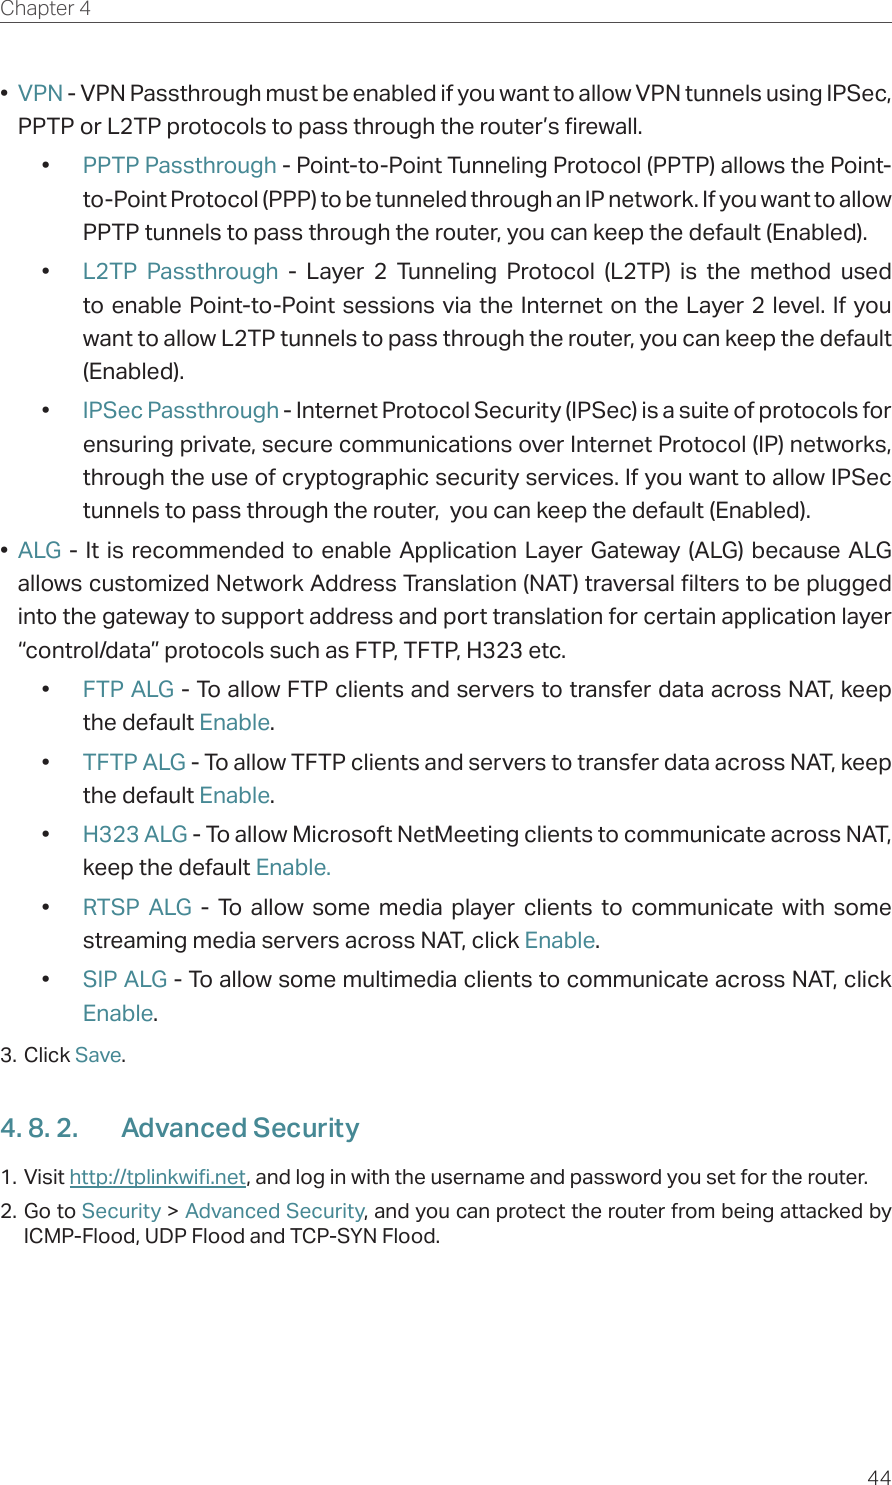 44Chapter 4  •  VPN - VPN Passthrough must be enabled if you want to allow VPN tunnels using IPSec, PPTP or L2TP protocols to pass through the router’s firewall.•  PPTP Passthrough - Point-to-Point Tunneling Protocol (PPTP) allows the Point-to-Point Protocol (PPP) to be tunneled through an IP network. If you want to allow PPTP tunnels to pass through the router, you can keep the default (Enabled). •  L2TP Passthrough - Layer 2 Tunneling Protocol (L2TP) is the method used to enable Point-to-Point sessions via the Internet on the Layer 2 level. If you want to allow L2TP tunnels to pass through the router, you can keep the default (Enabled).•  IPSec Passthrough - Internet Protocol Security (IPSec) is a suite of protocols for ensuring private, secure communications over Internet Protocol (IP) networks, through the use of cryptographic security services. If you want to allow IPSec tunnels to pass through the router,  you can keep the default (Enabled).•  ALG - It is recommended to enable Application Layer Gateway (ALG) because ALG allows customized Network Address Translation (NAT) traversal filters to be plugged into the gateway to support address and port translation for certain application layer “control/data” protocols such as FTP, TFTP, H323 etc. •  FTP ALG - To allow FTP clients and servers to transfer data across NAT, keep the default Enable. •  TFTP ALG - To allow TFTP clients and servers to transfer data across NAT, keep the default Enable.•  H323 ALG - To allow Microsoft NetMeeting clients to communicate across NAT, keep the default Enable.•  RTSP ALG - To allow some media player clients to communicate with some streaming media servers across NAT, click Enable.•  SIP ALG - To allow some multimedia clients to communicate across NAT, click Enable.3. Click Save.4. 8. 2.  Advanced Security1. Visit http://tplinkwifi.net, and log in with the username and password you set for the router.2. Go to Security &gt; Advanced Security, and you can protect the router from being attacked by ICMP-Flood, UDP Flood and TCP-SYN Flood. 